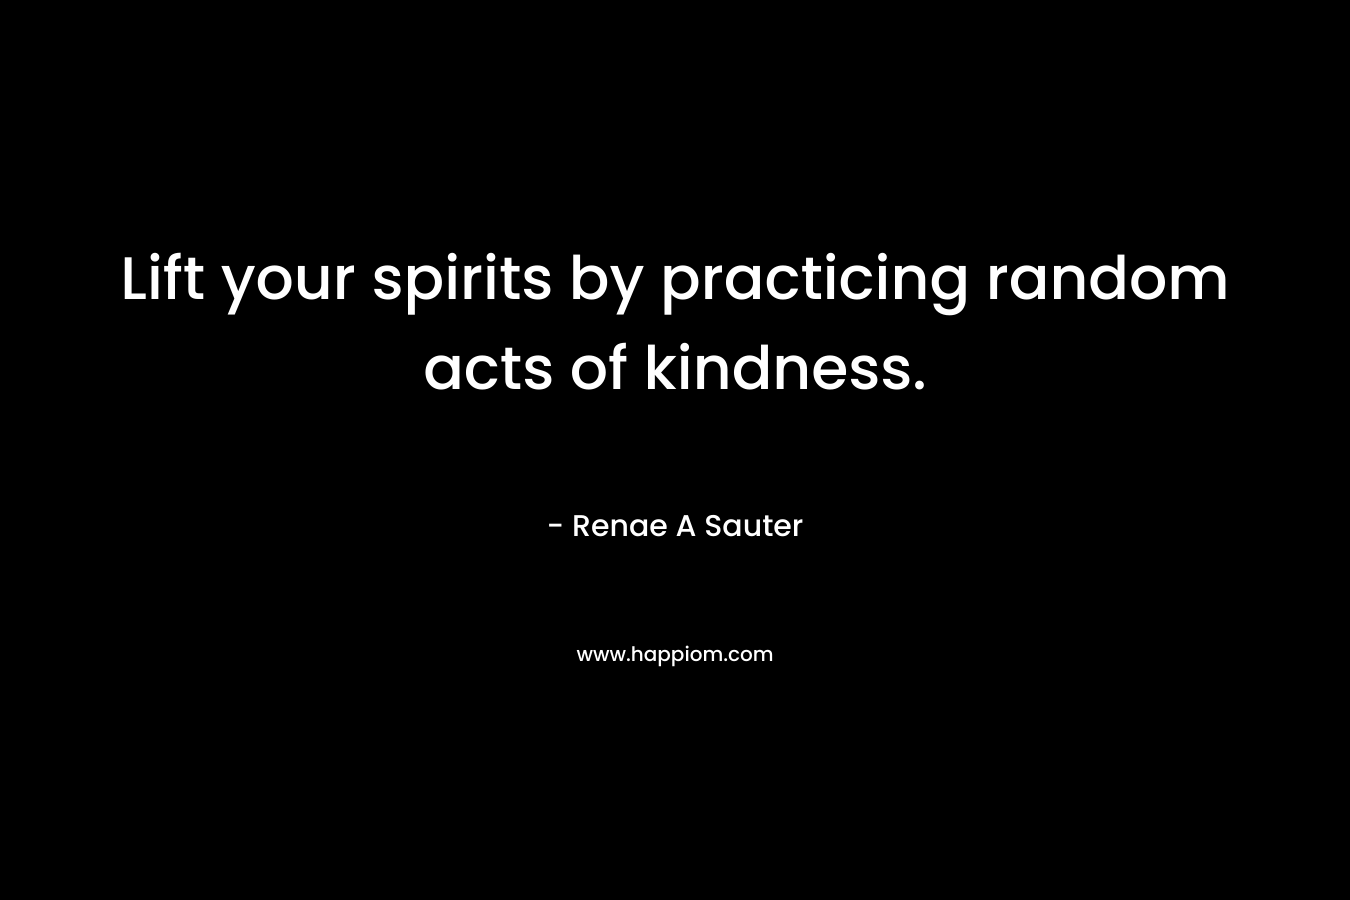 Lift your spirits by practicing random acts of kindness.